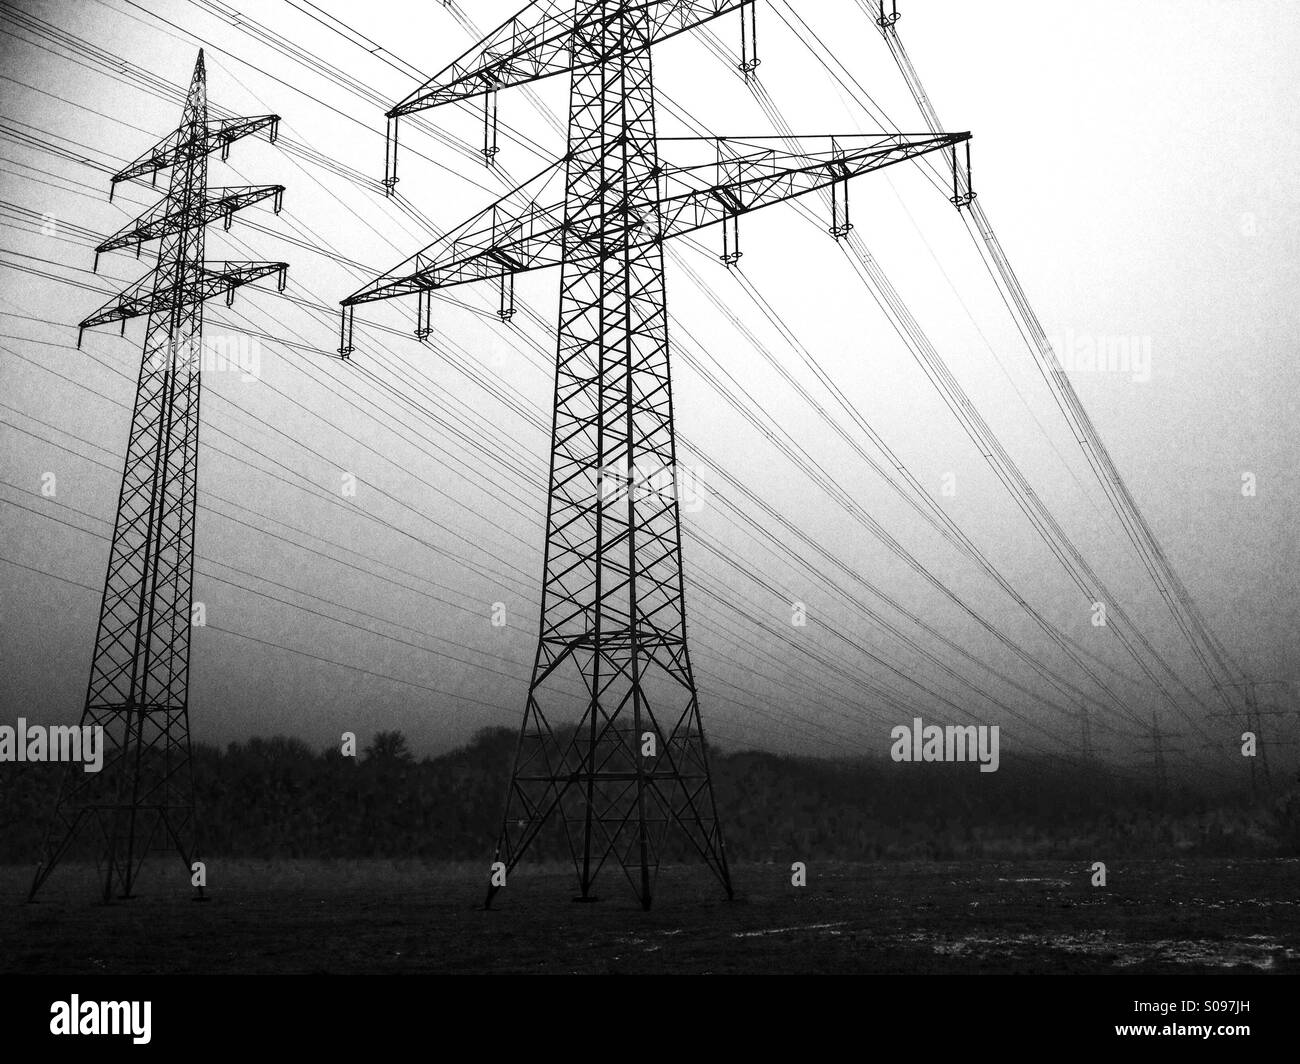 High voltage electricity cables, Leichlingen, Germany. Stock Photo